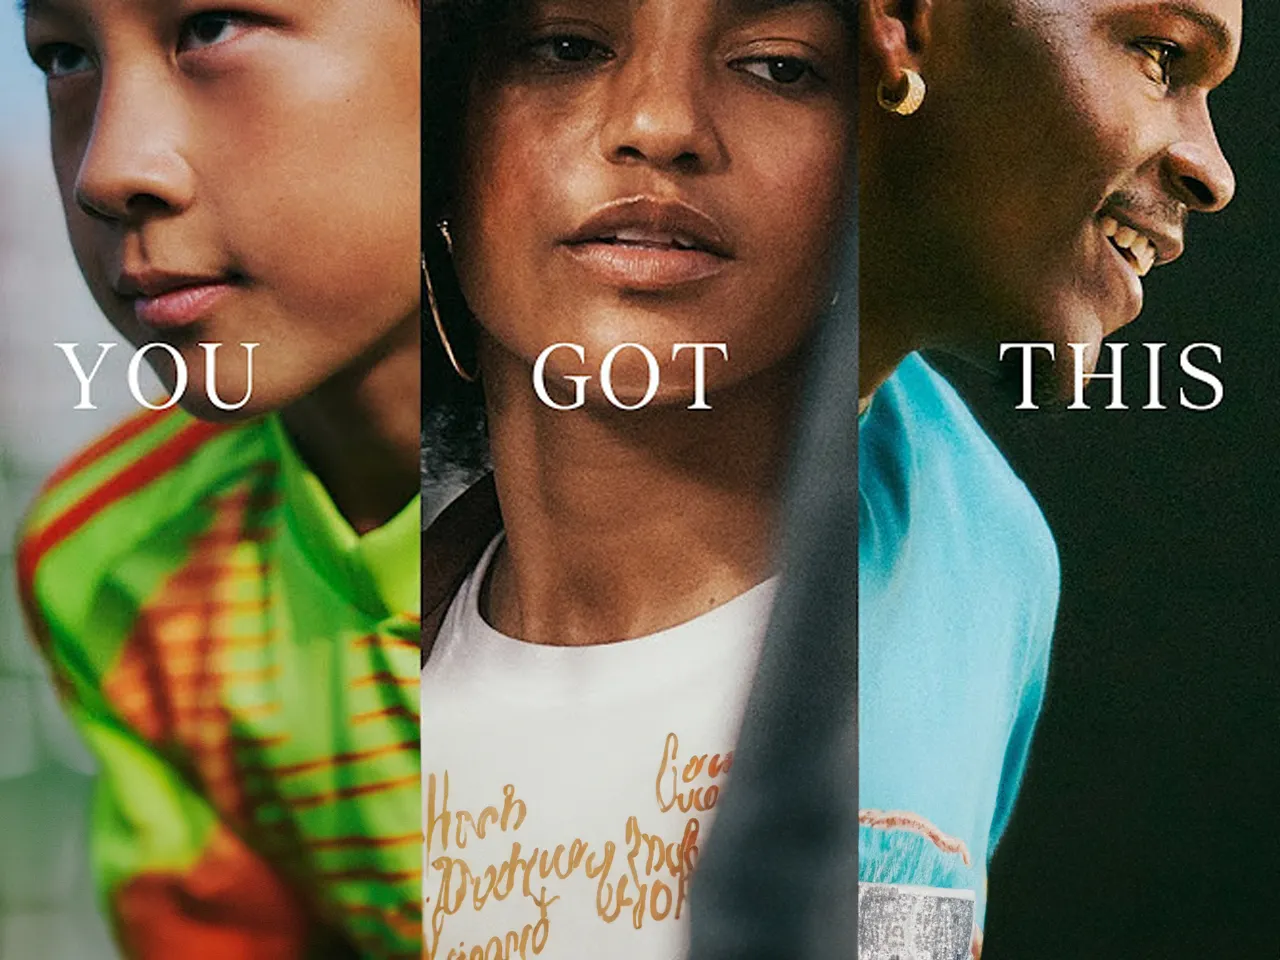 Adidas unites major icons to tackle negative sports pressure in global campaign